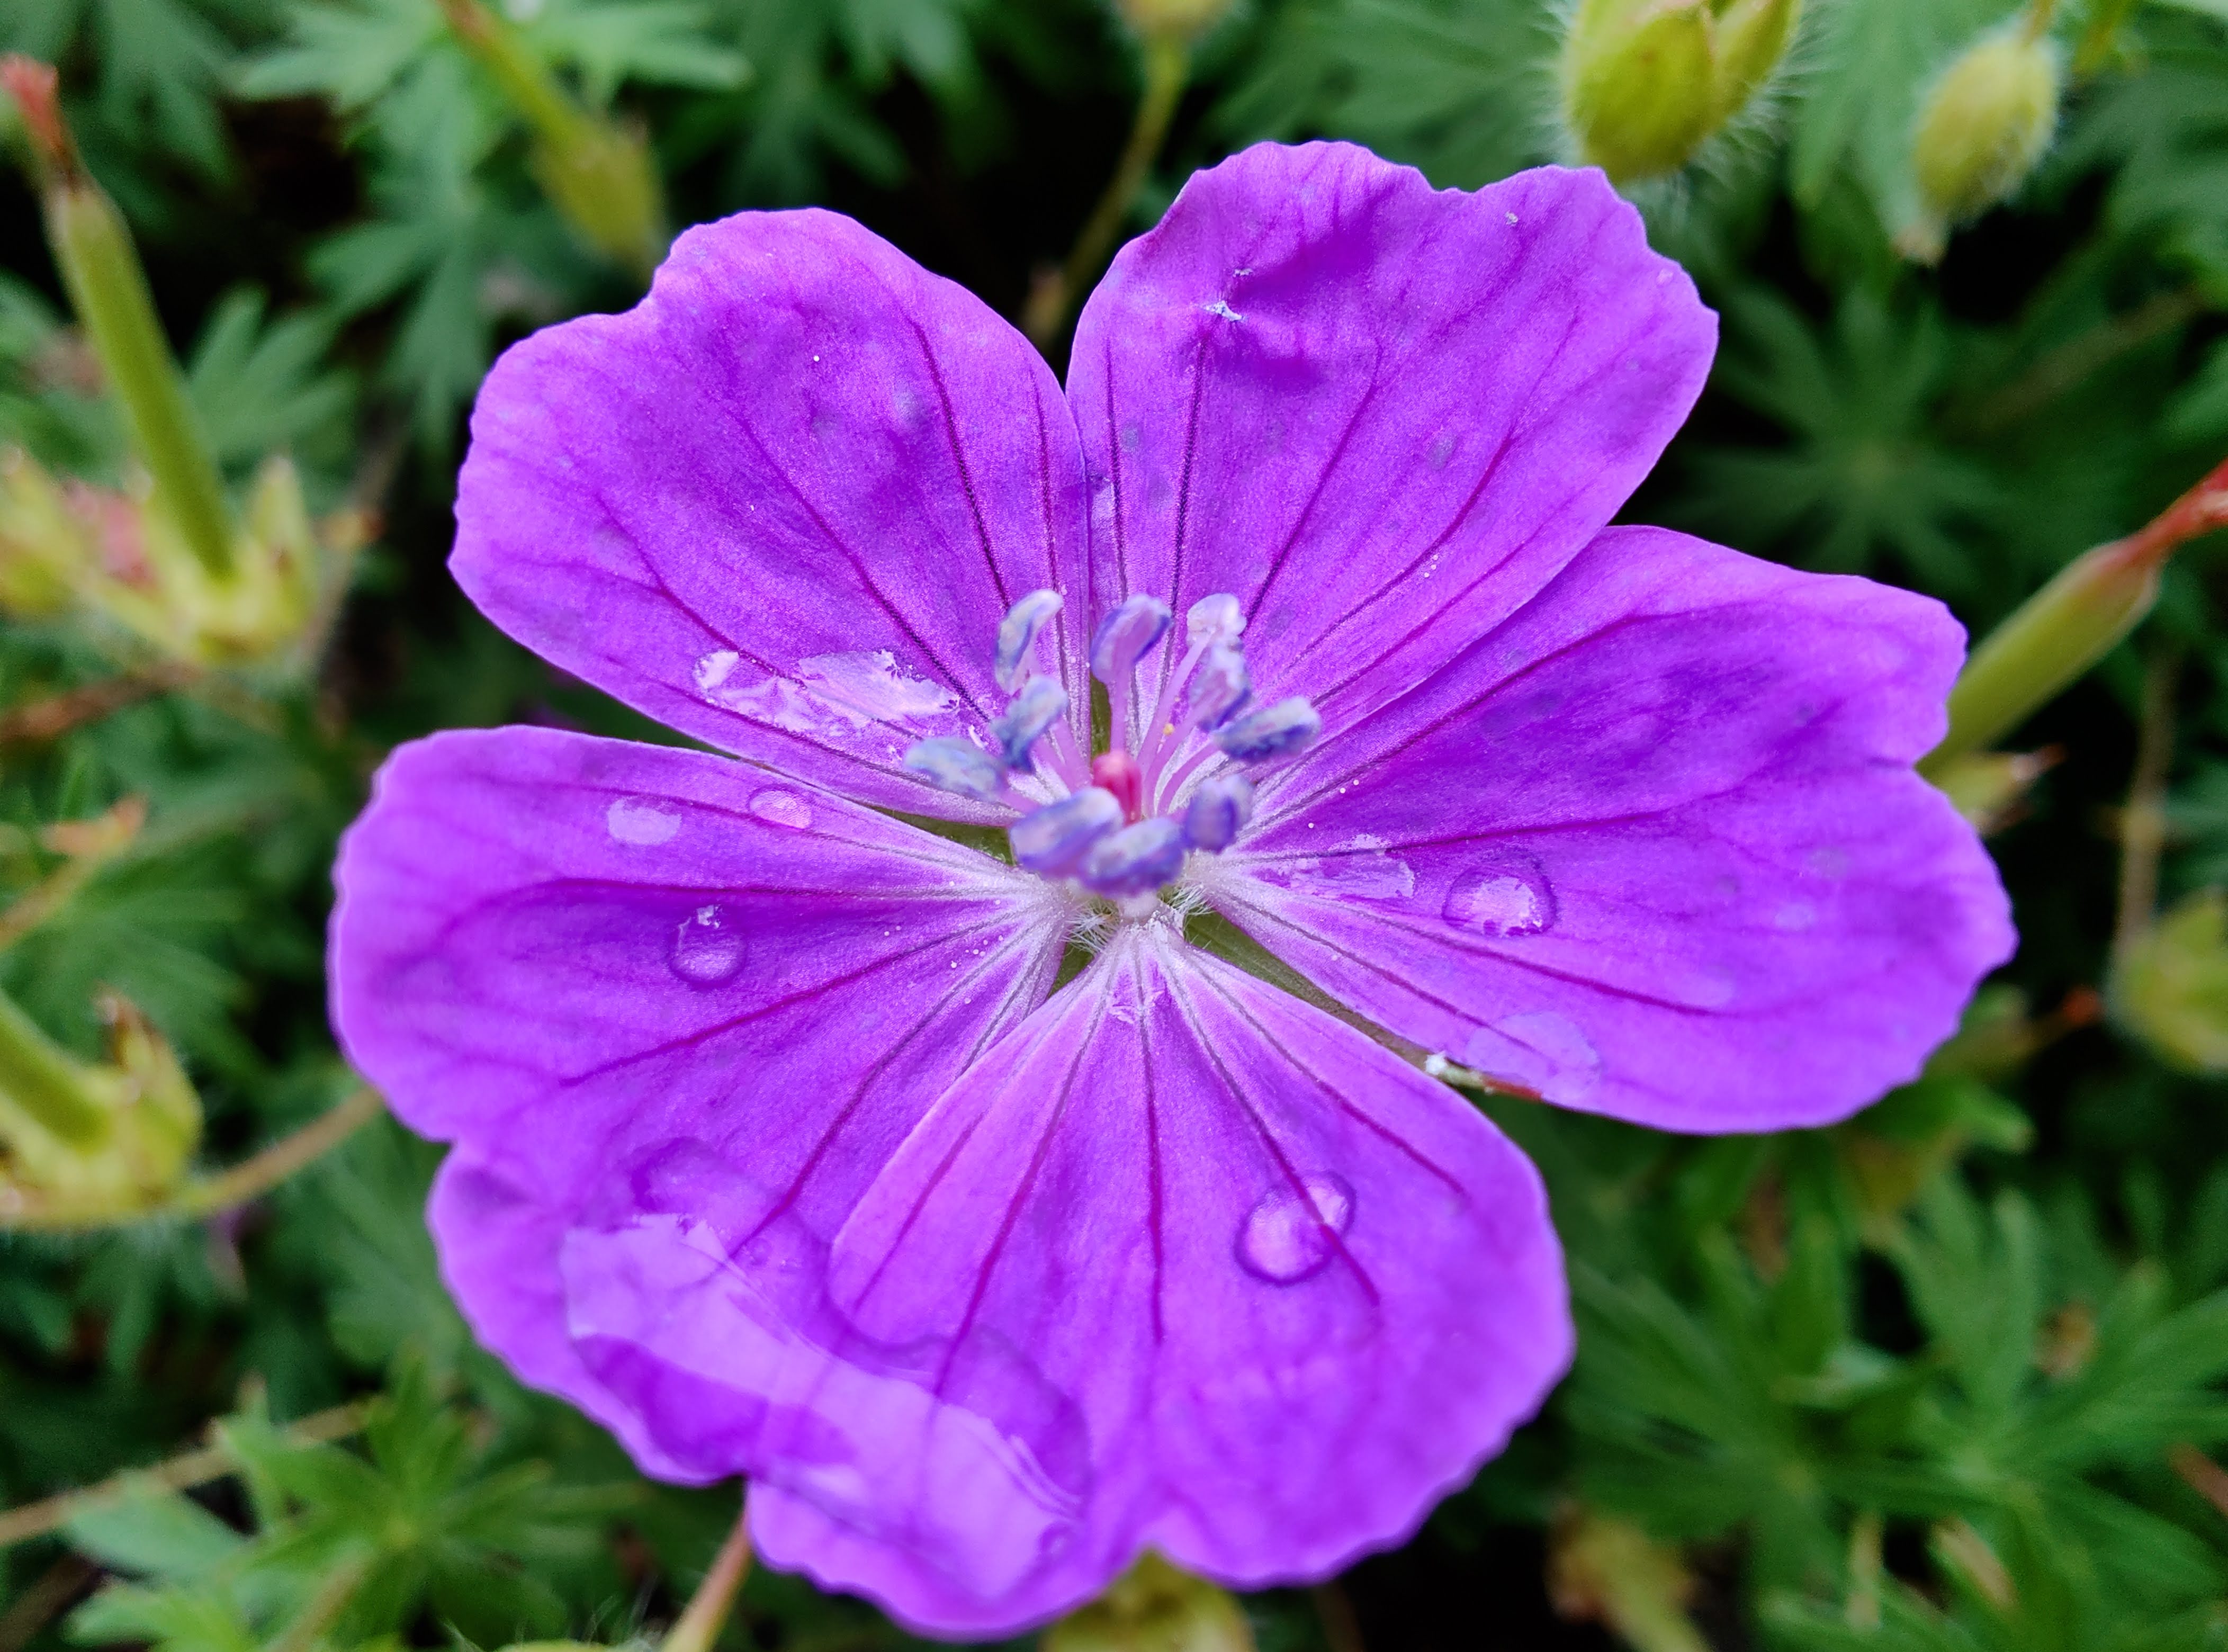 Macro photo of a purple flower with water droplets, taken with the Motorola Razr Plus.